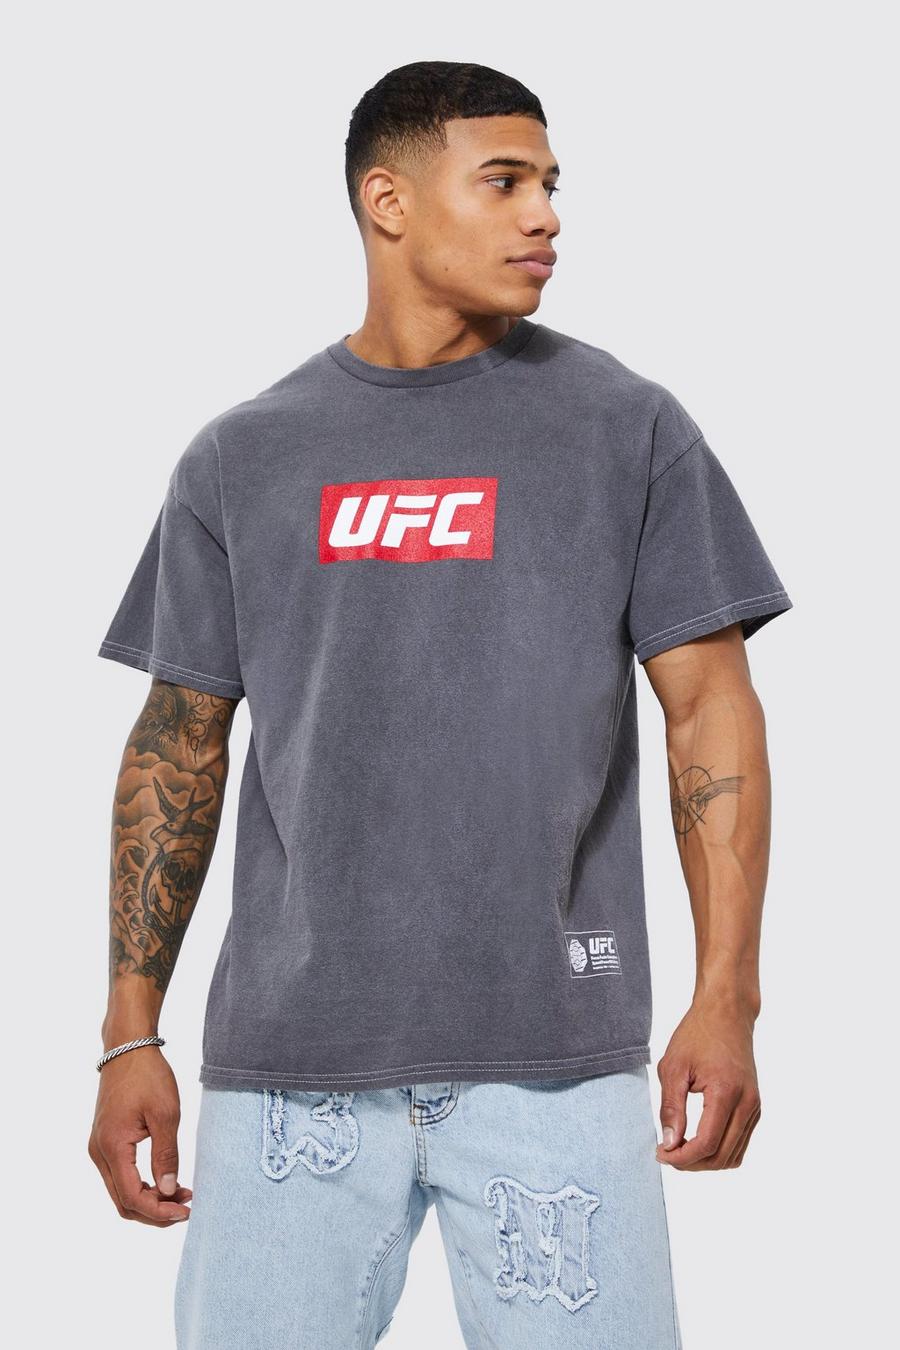 Charcoal grey Ufc Washed License T-shirt